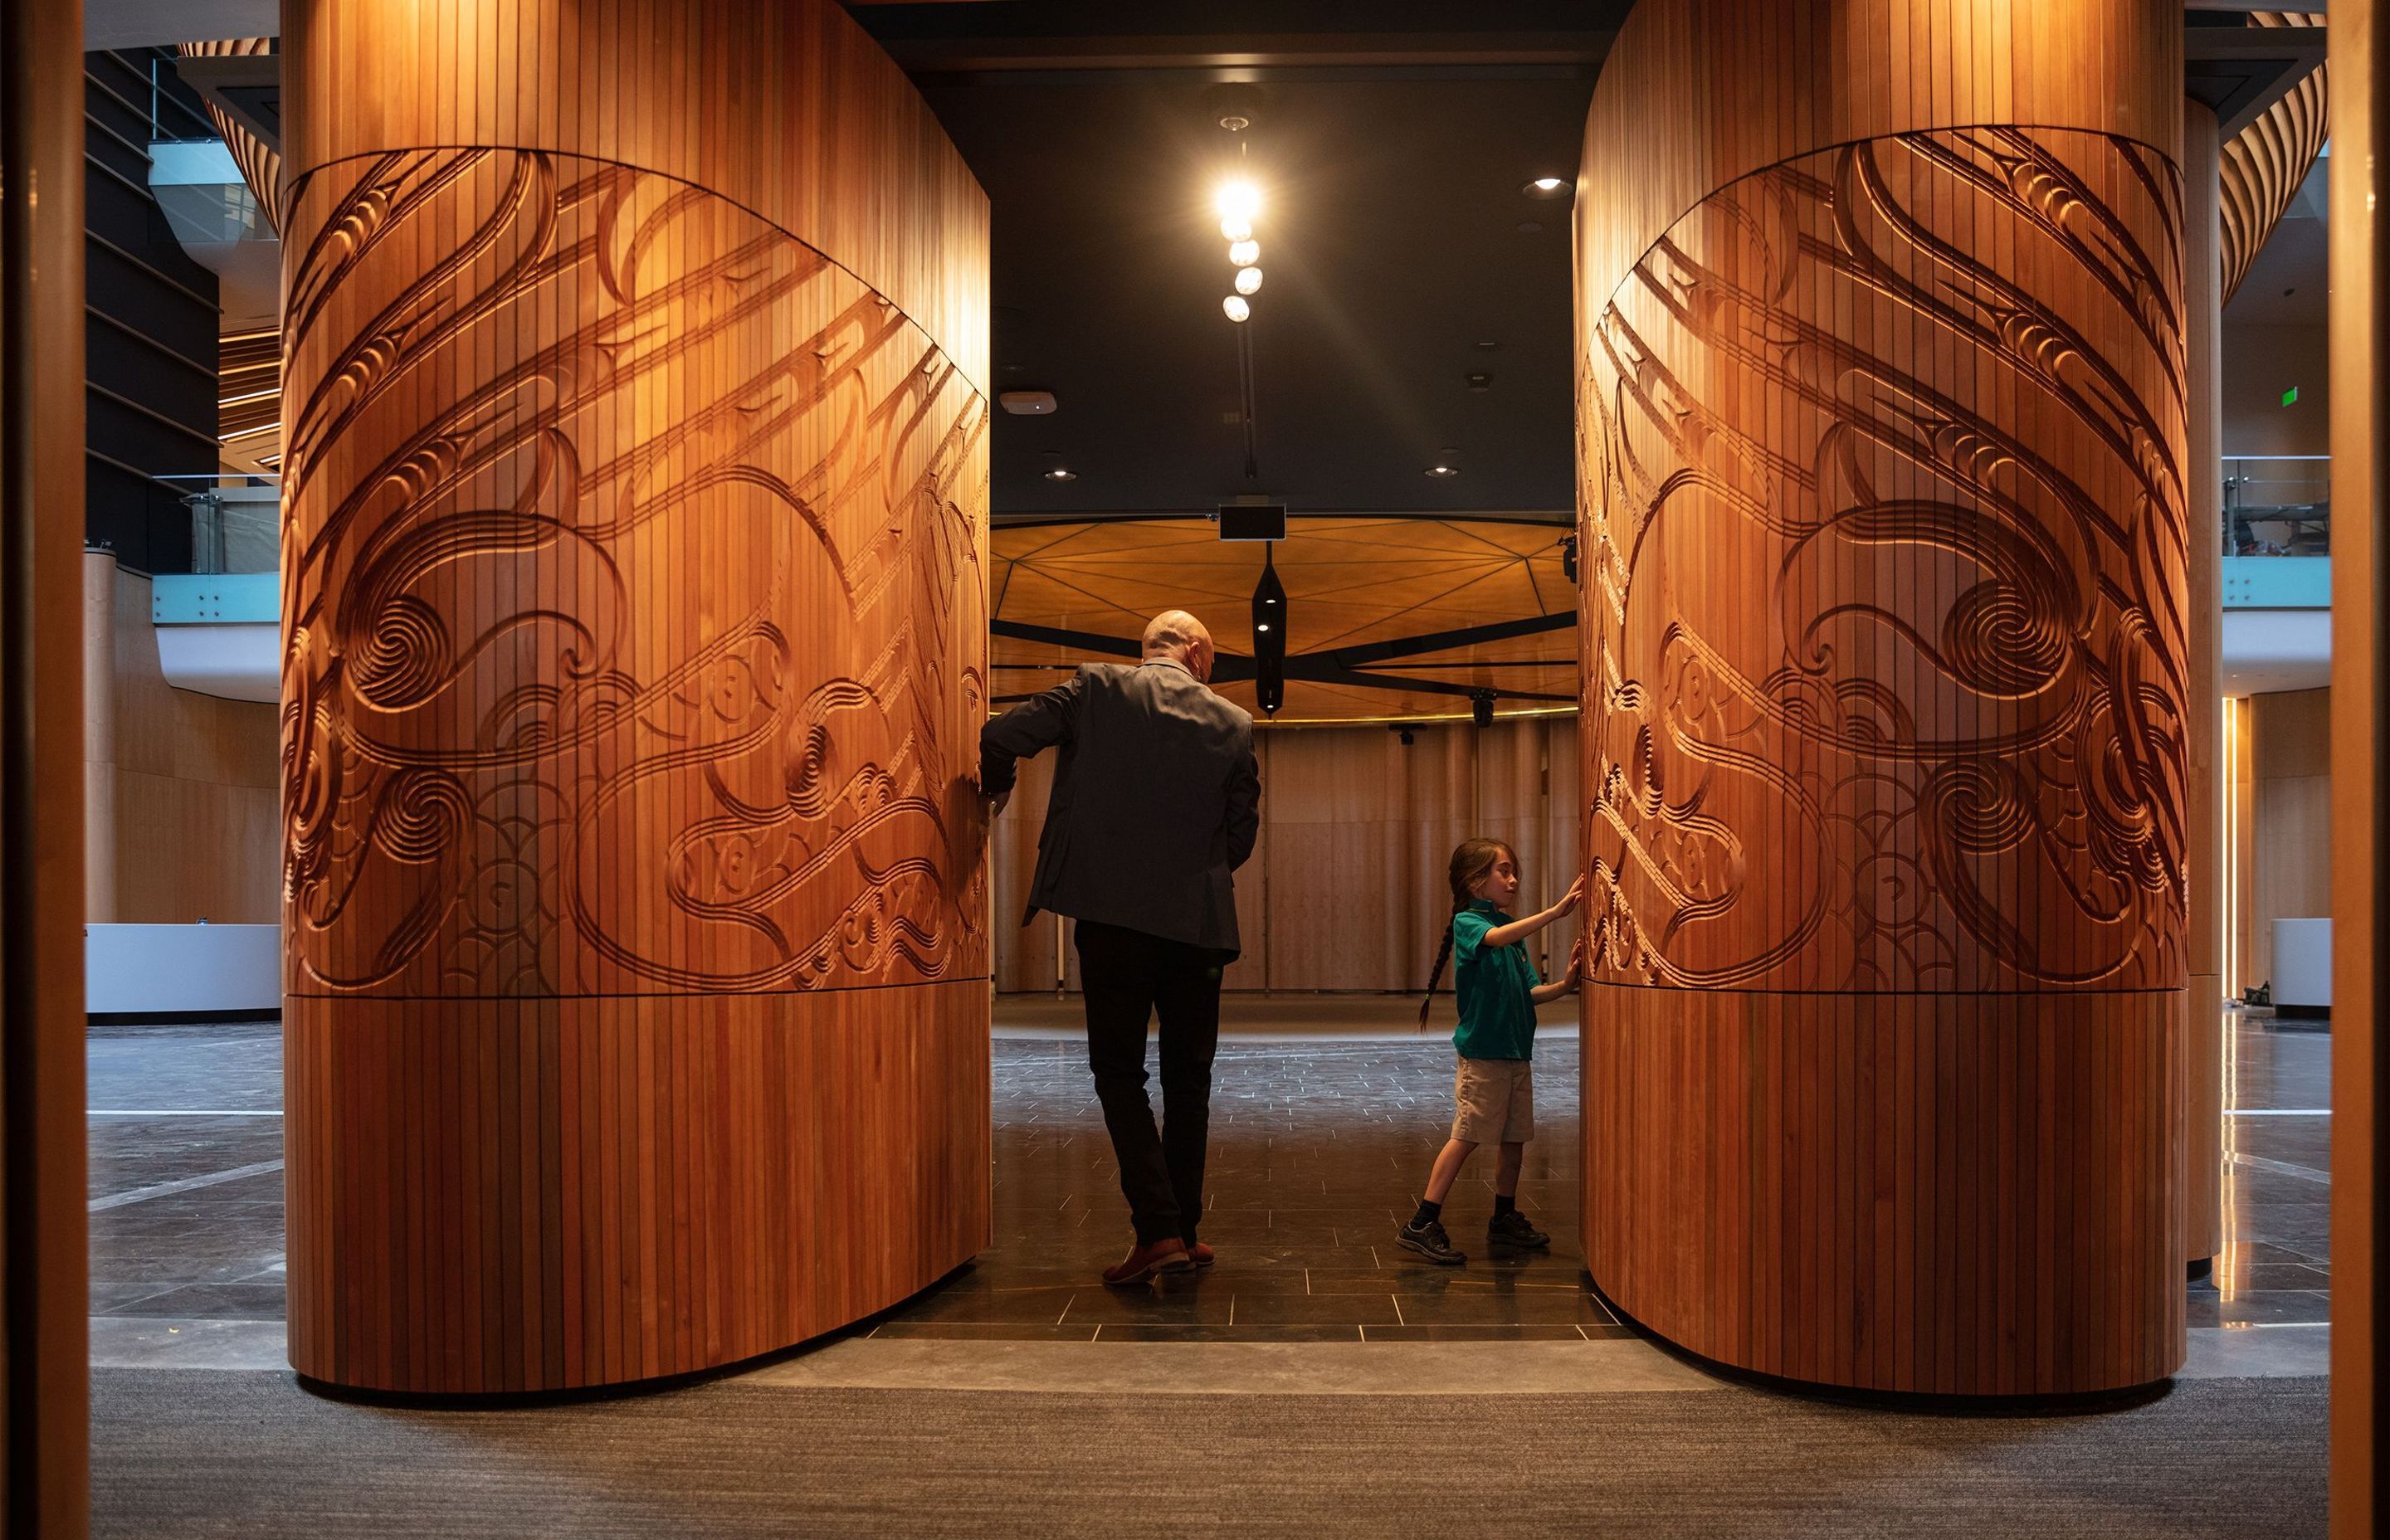 Te Tatau Kaitiaki by Ngāti Whātua artist Graham Tipene—made of CNC-routed timber—depicts two female faces and greets visitors entering through the southern entrance of the South Atrium.